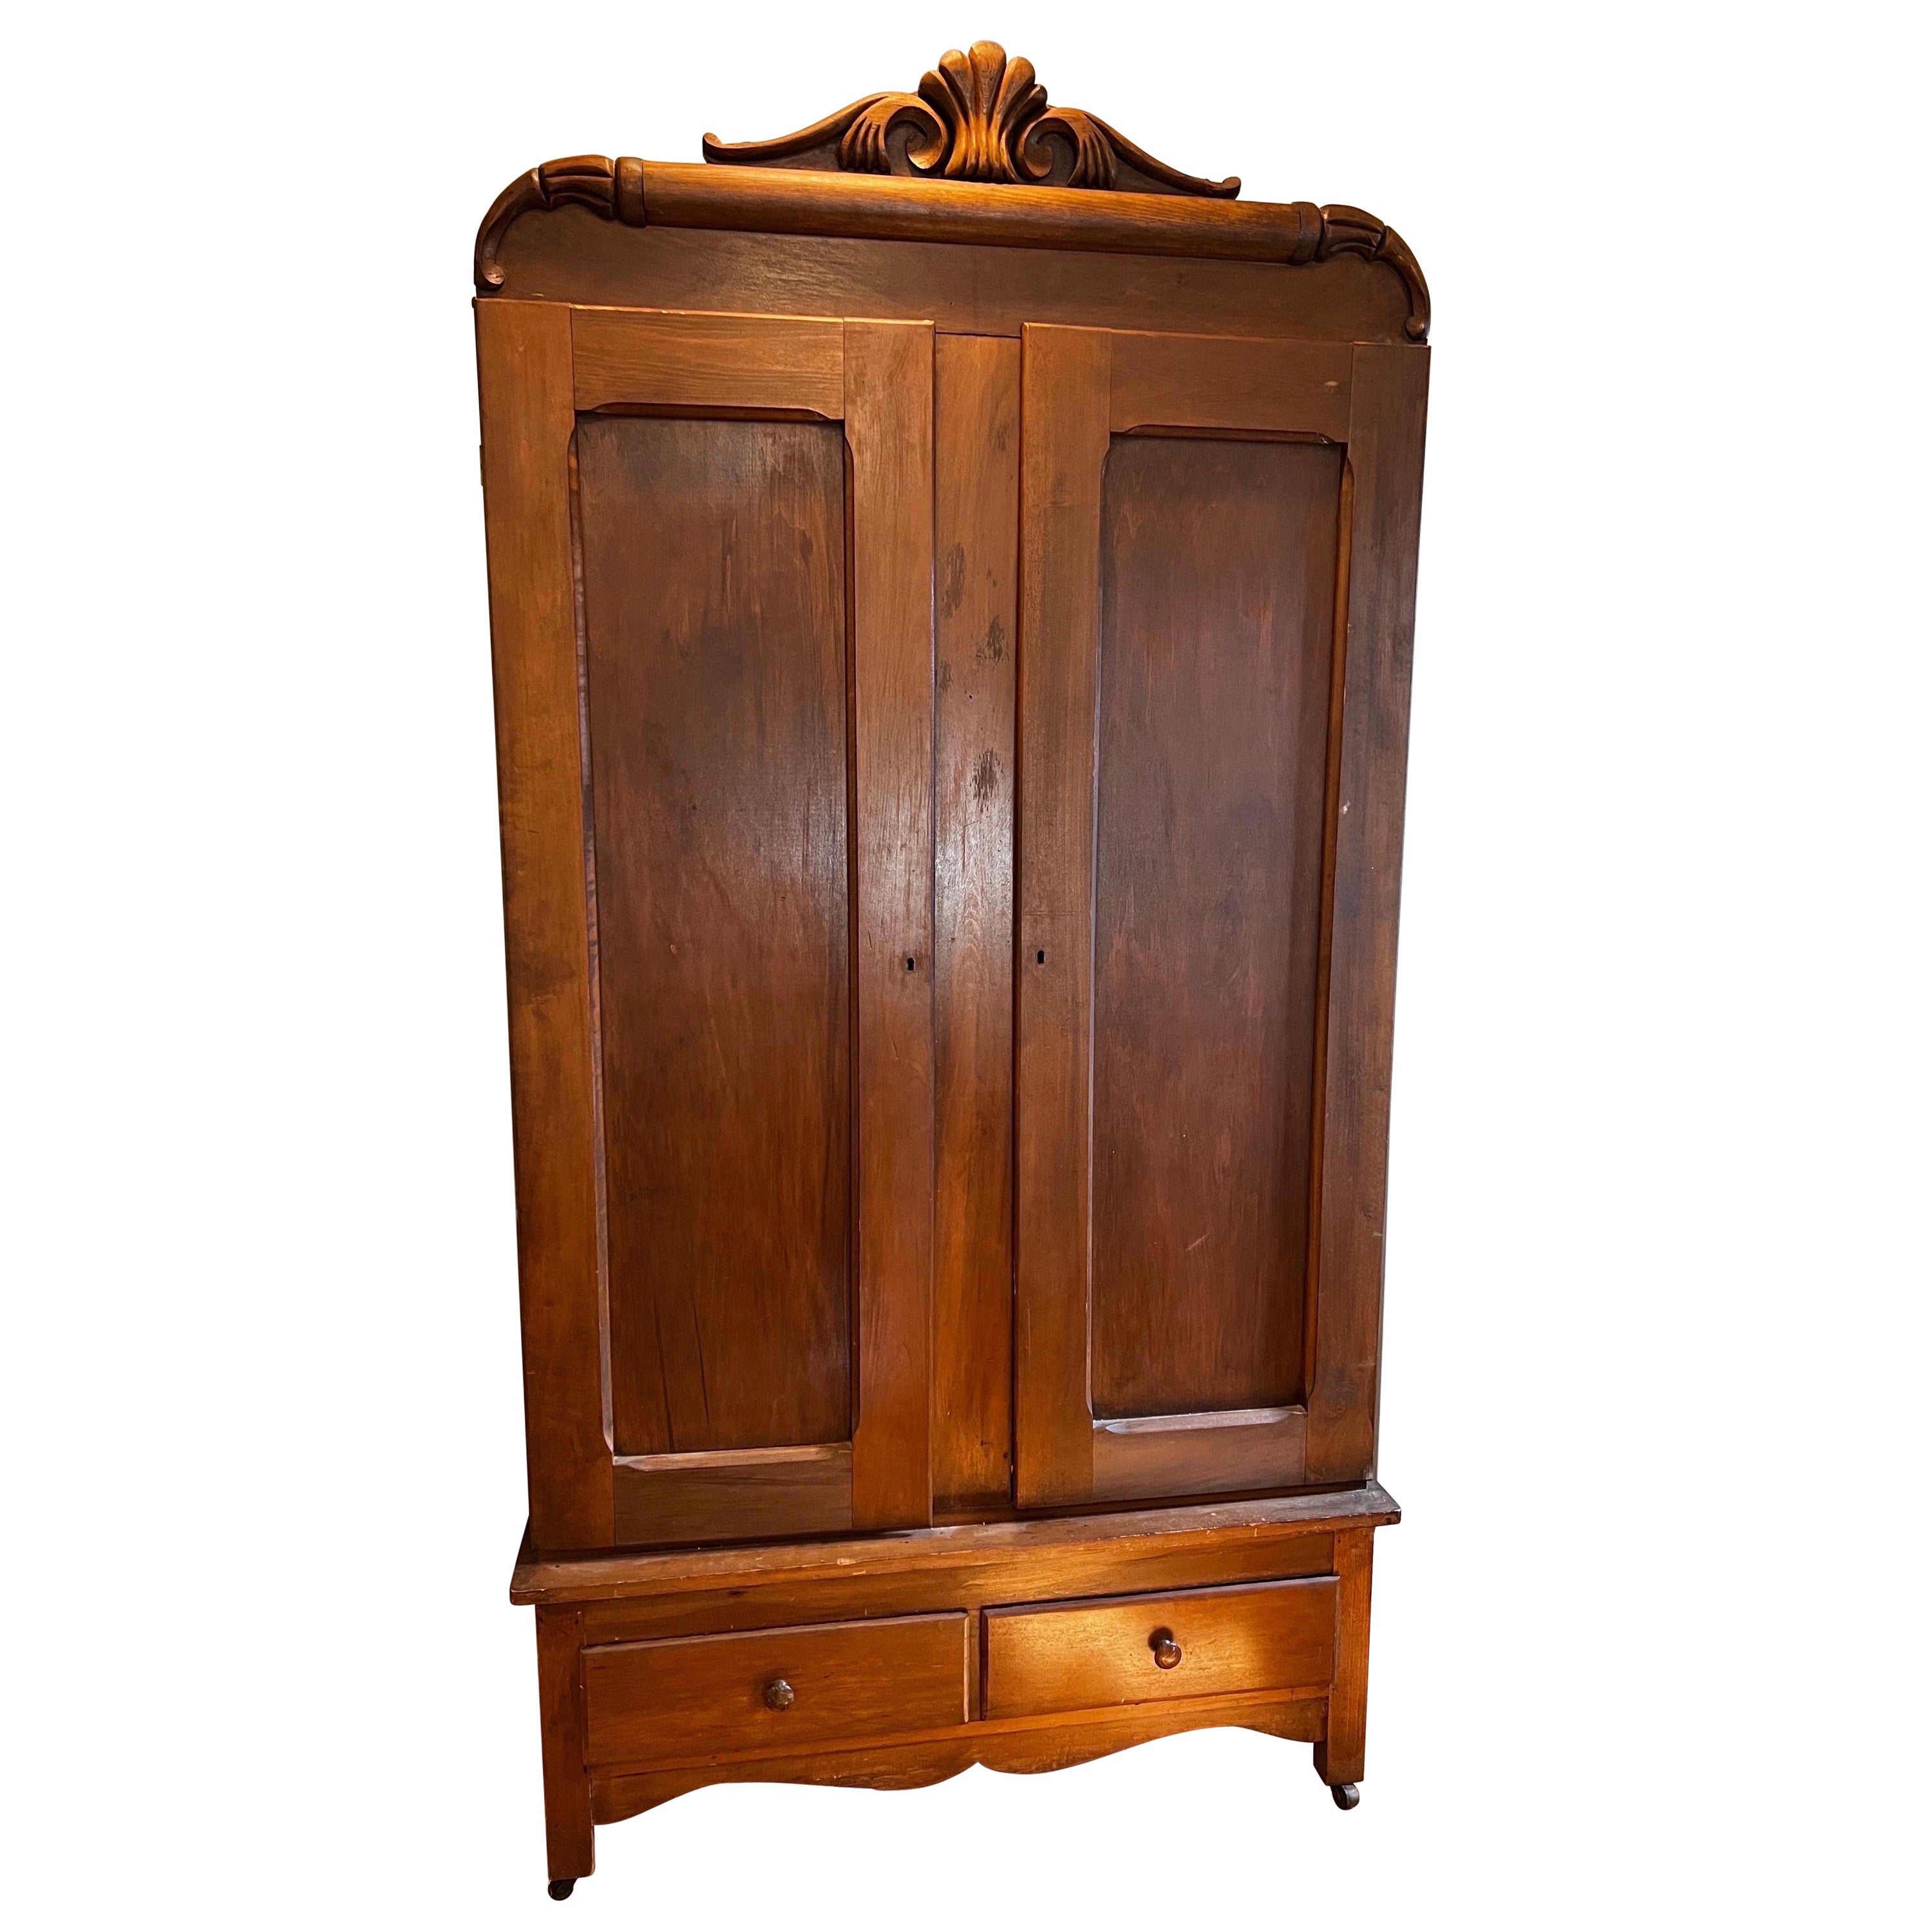 Antique Cabinet /Armoire with Carved Detail on Top